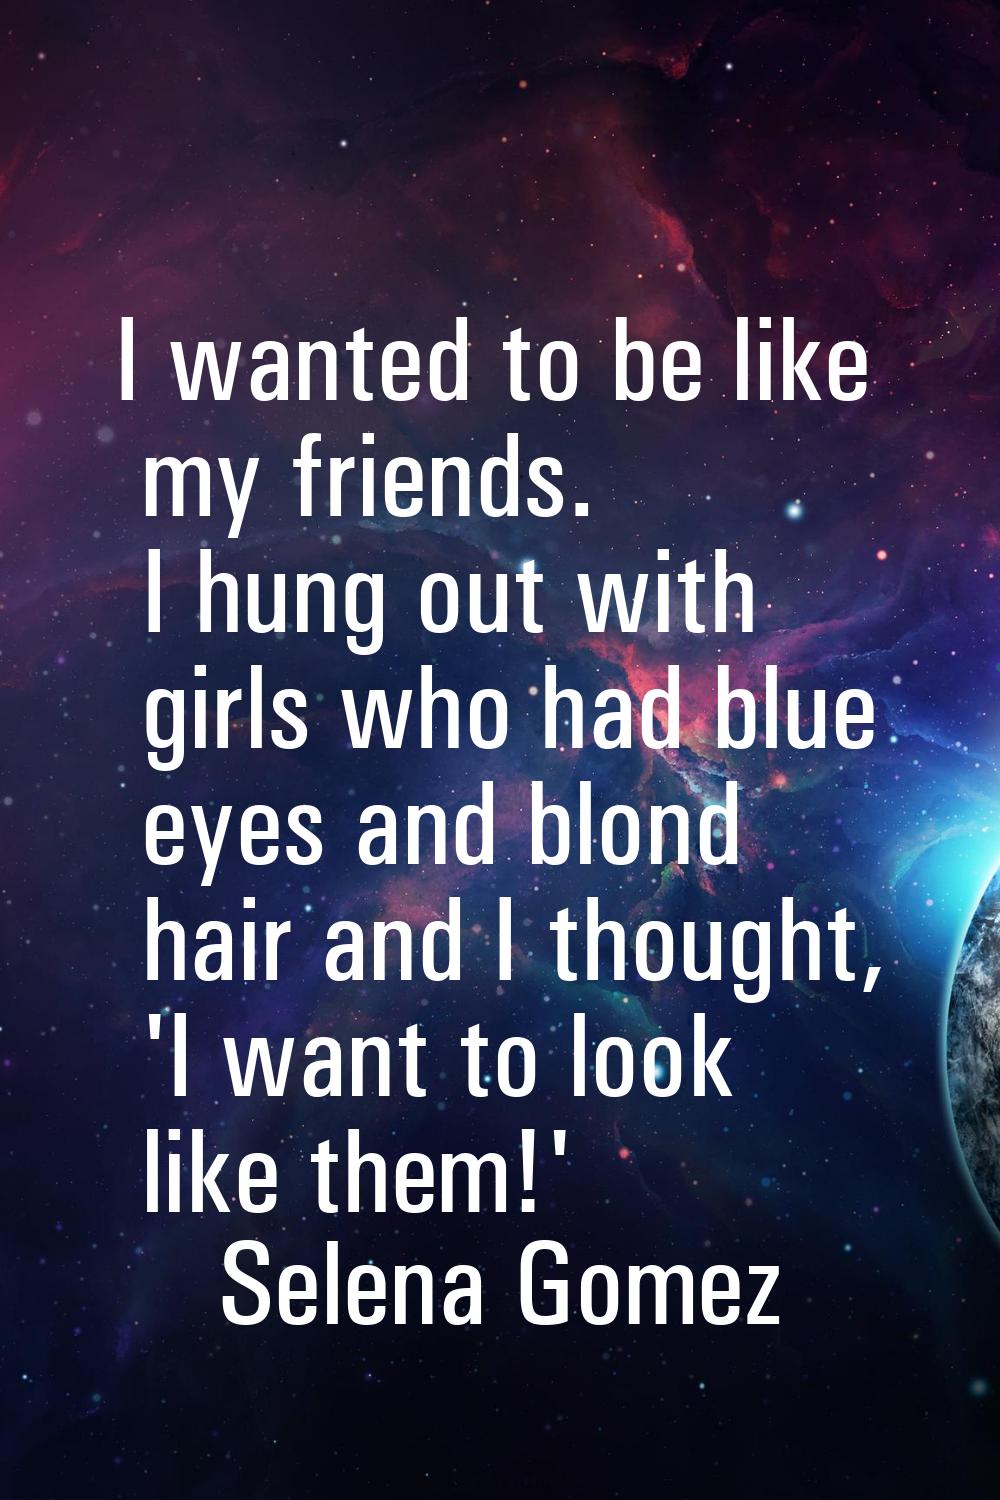 I wanted to be like my friends. I hung out with girls who had blue eyes and blond hair and I though